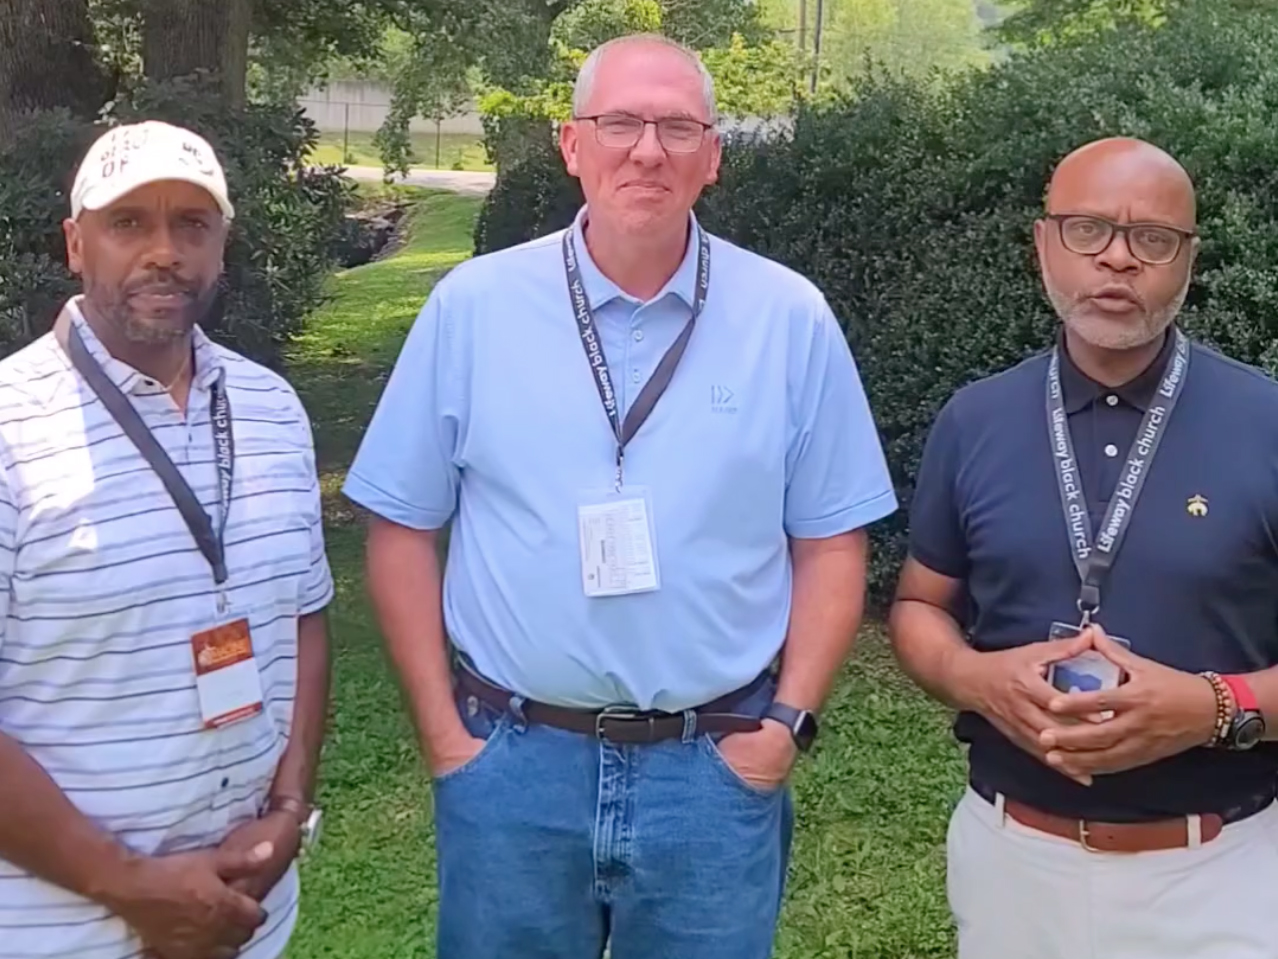 National African American Fellowship of the Southern Baptist Convention vice president Jerome Coleman, from left, SBC President Bart Barber and NAAF president Gregory Perkins together in a video. Video screen grab